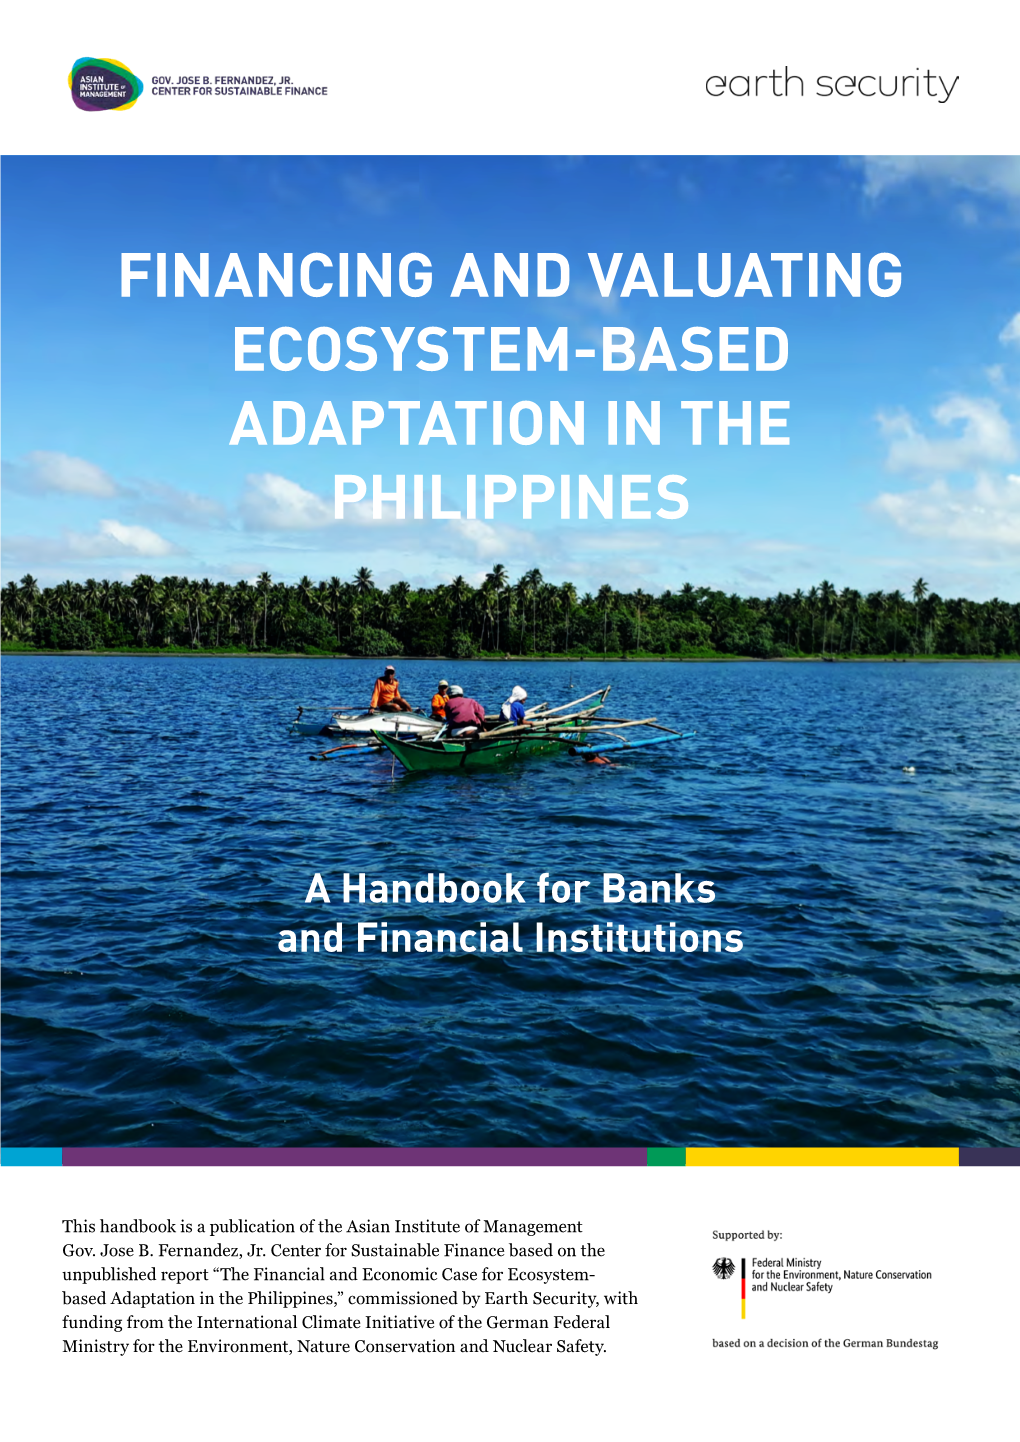 Financing and Valuating Ecosystem-Based Adaptation in the Philippines